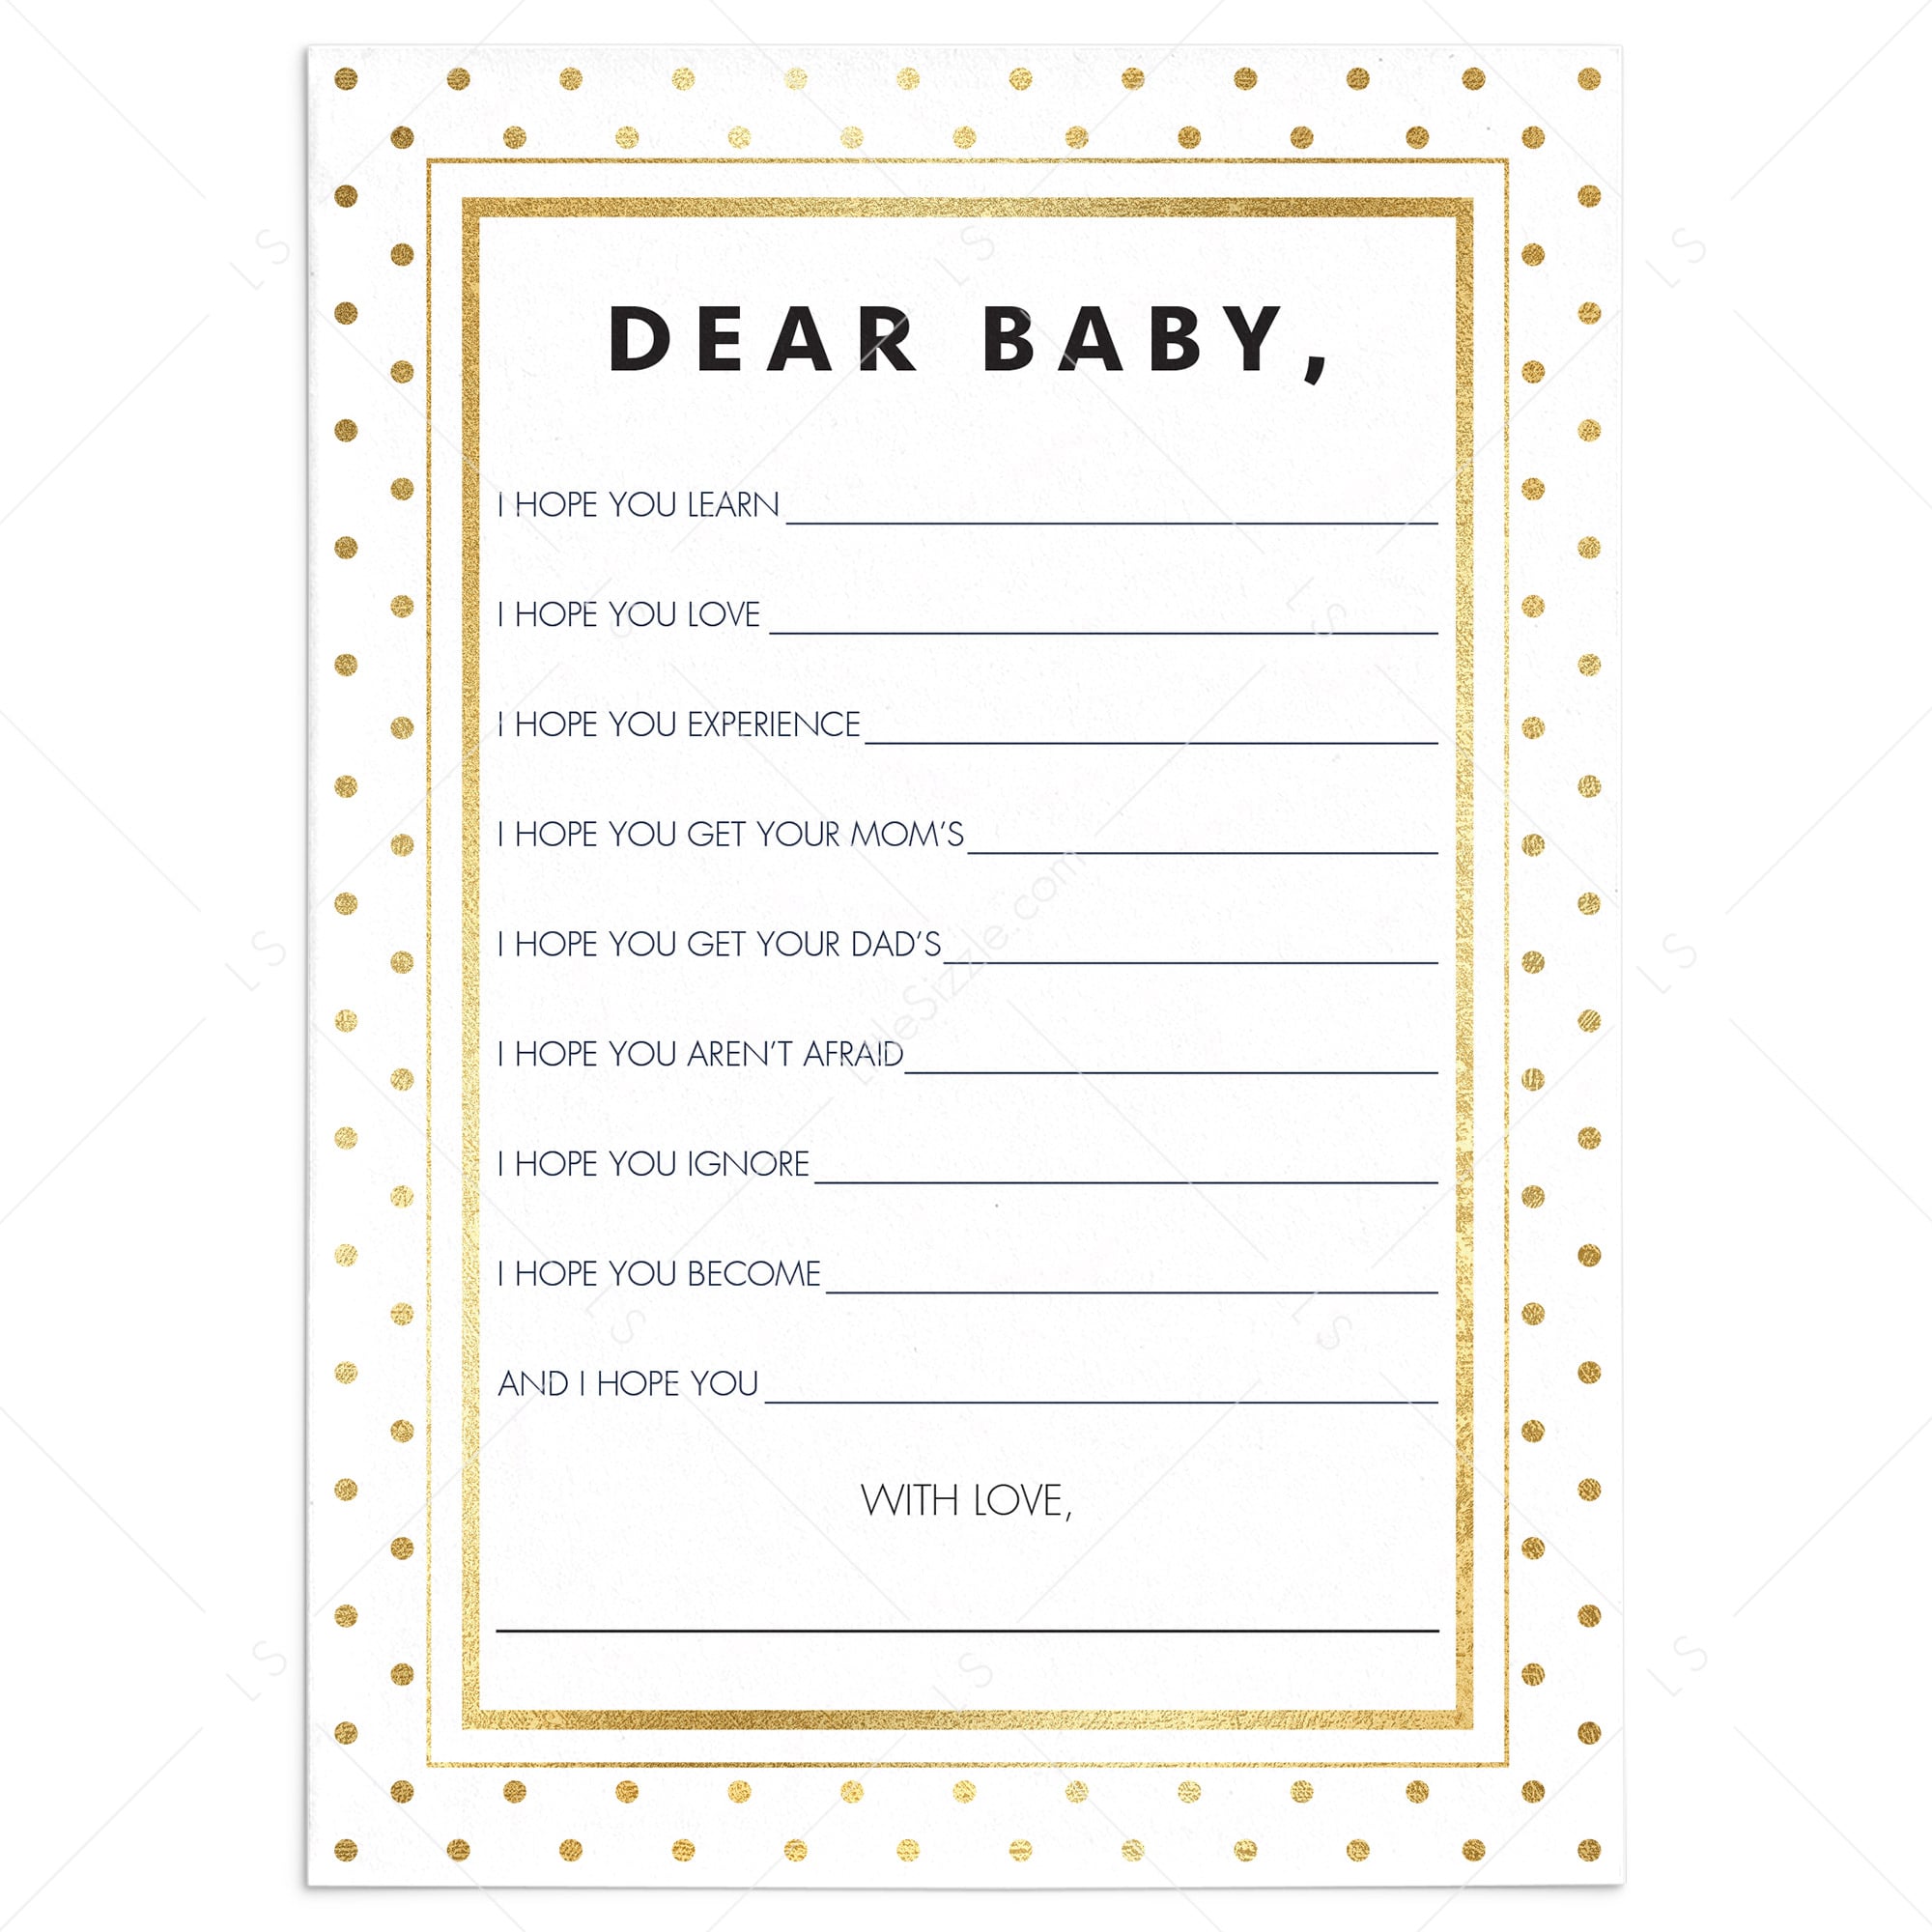 Modern baby shower wish card printable by LittleSizzle